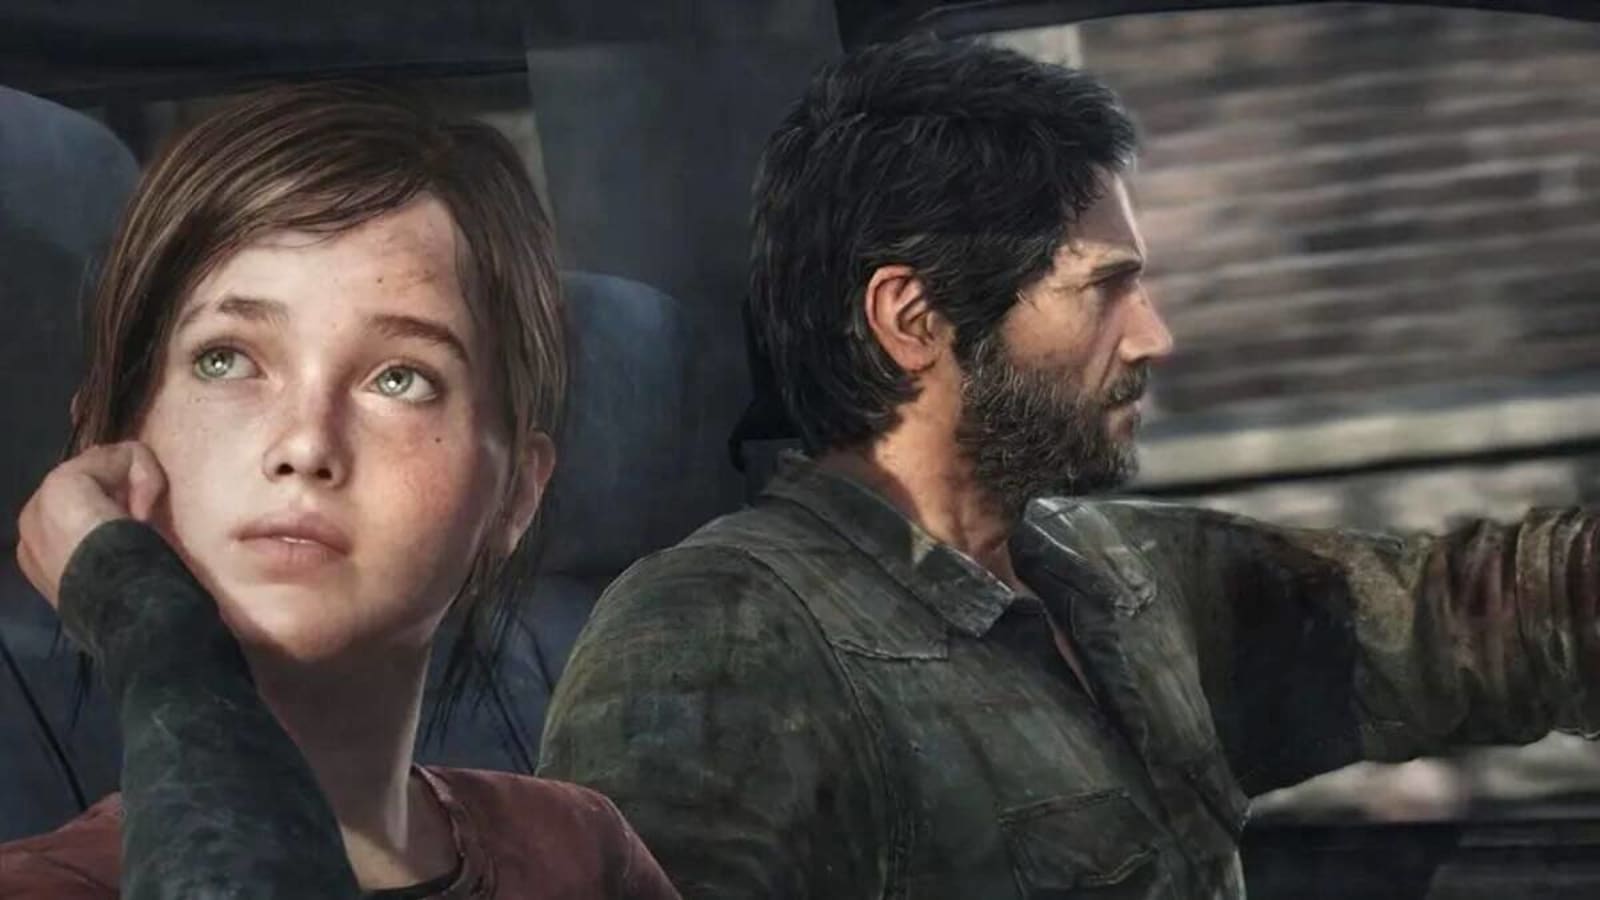 Naughty Dog Promises To Fix The Last Of Us Part 1 Issues On PC After Fan  Uproar - Gameranx